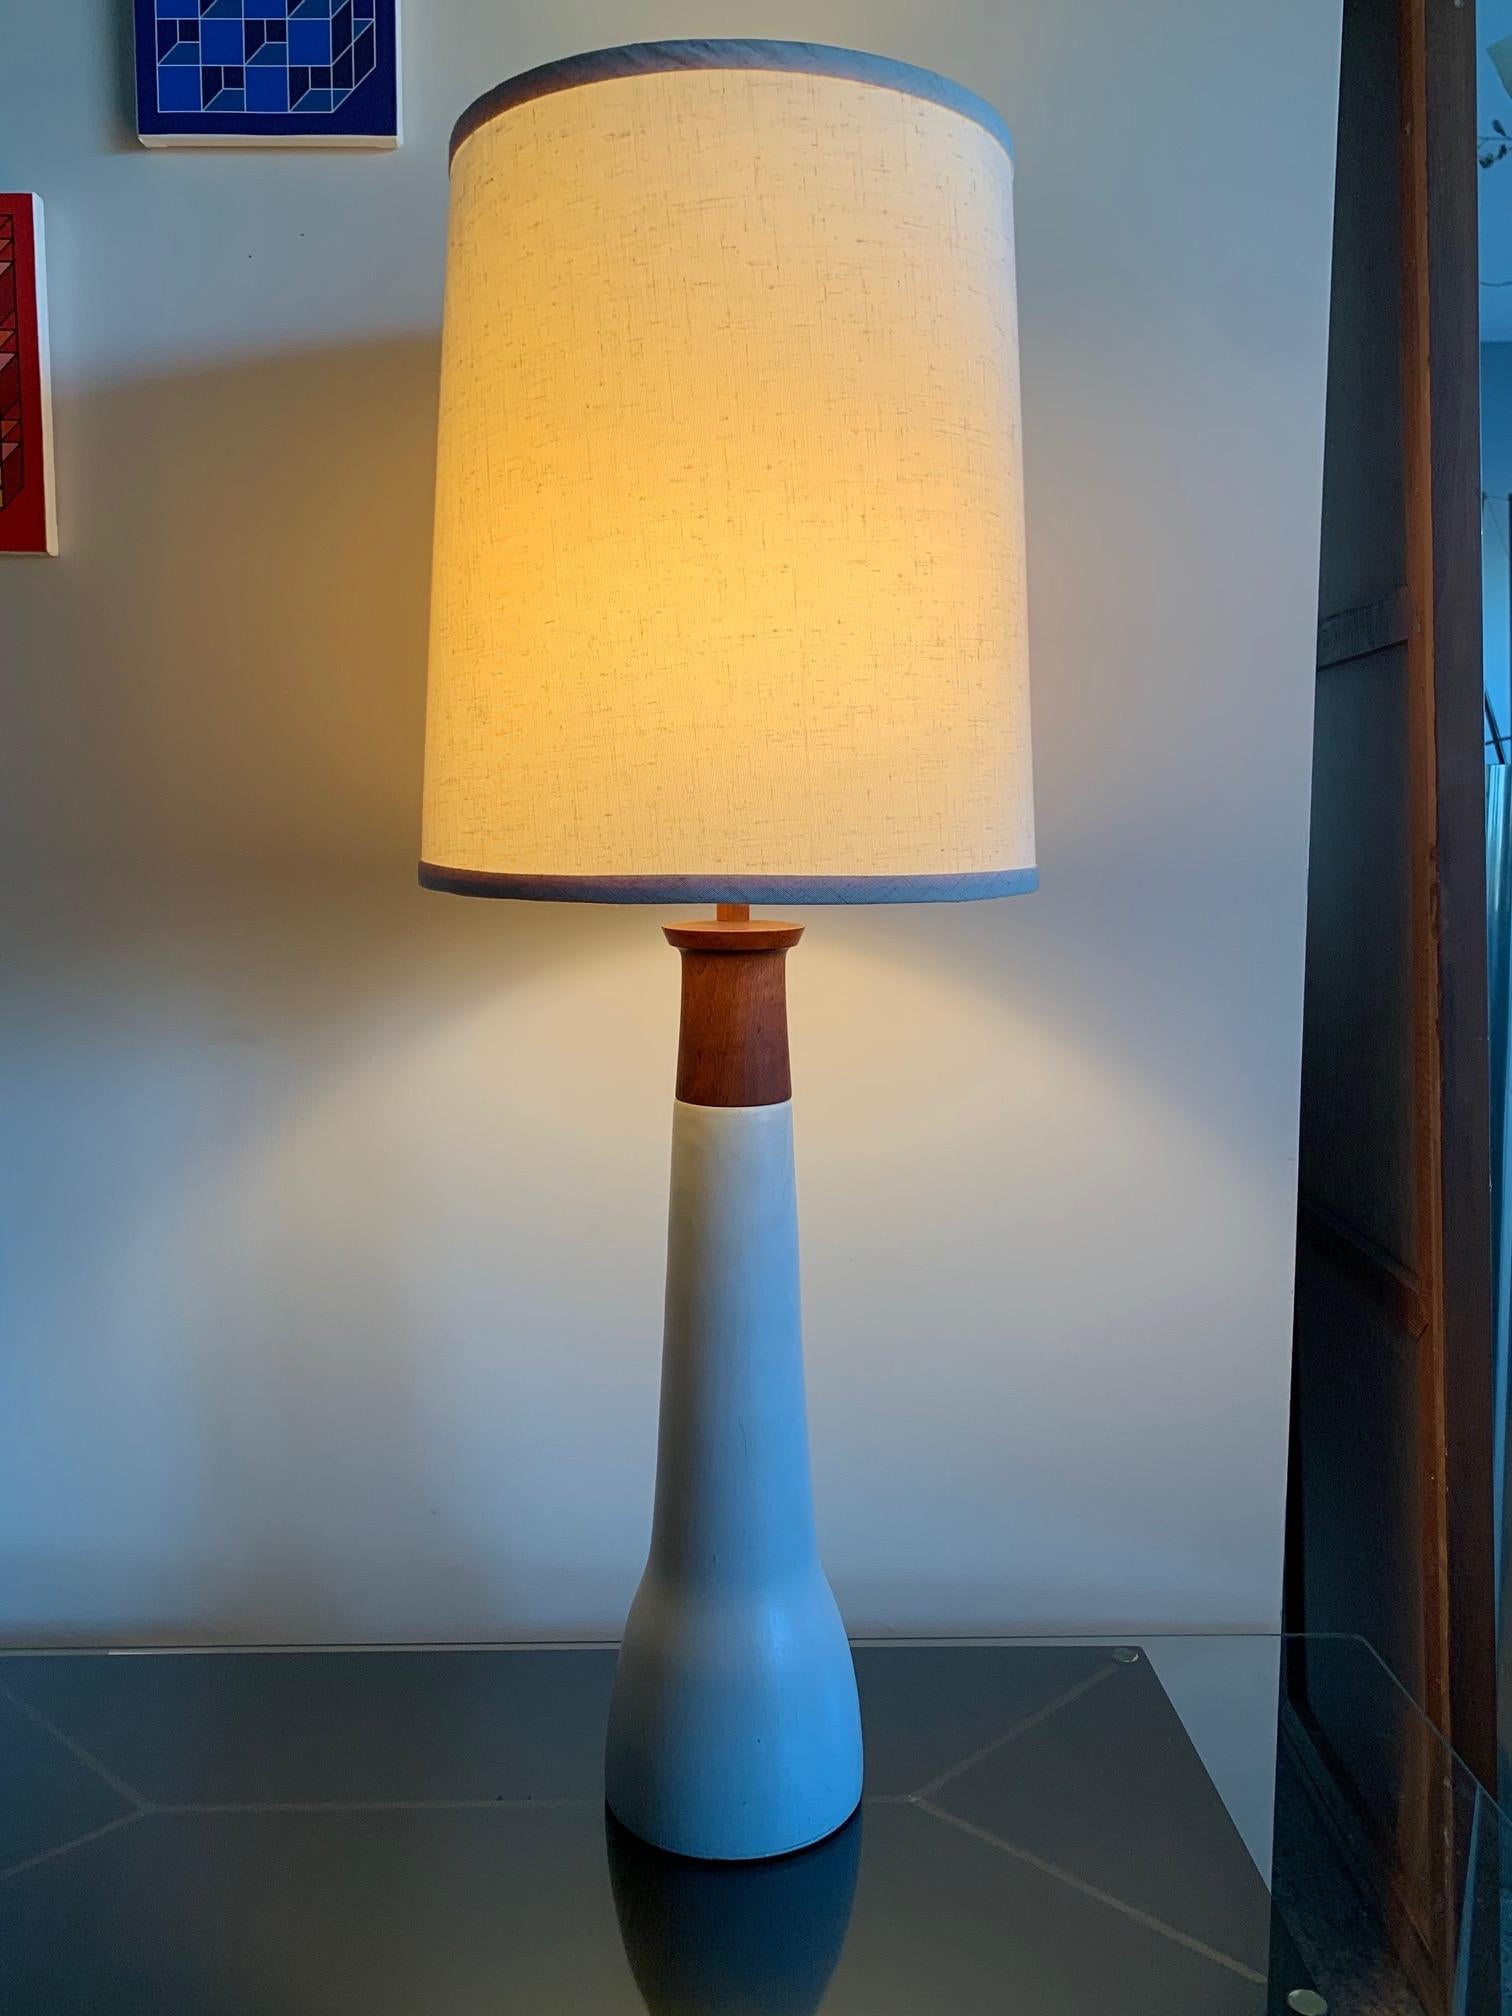 A Classic and elegant table lamp by Martz studios.